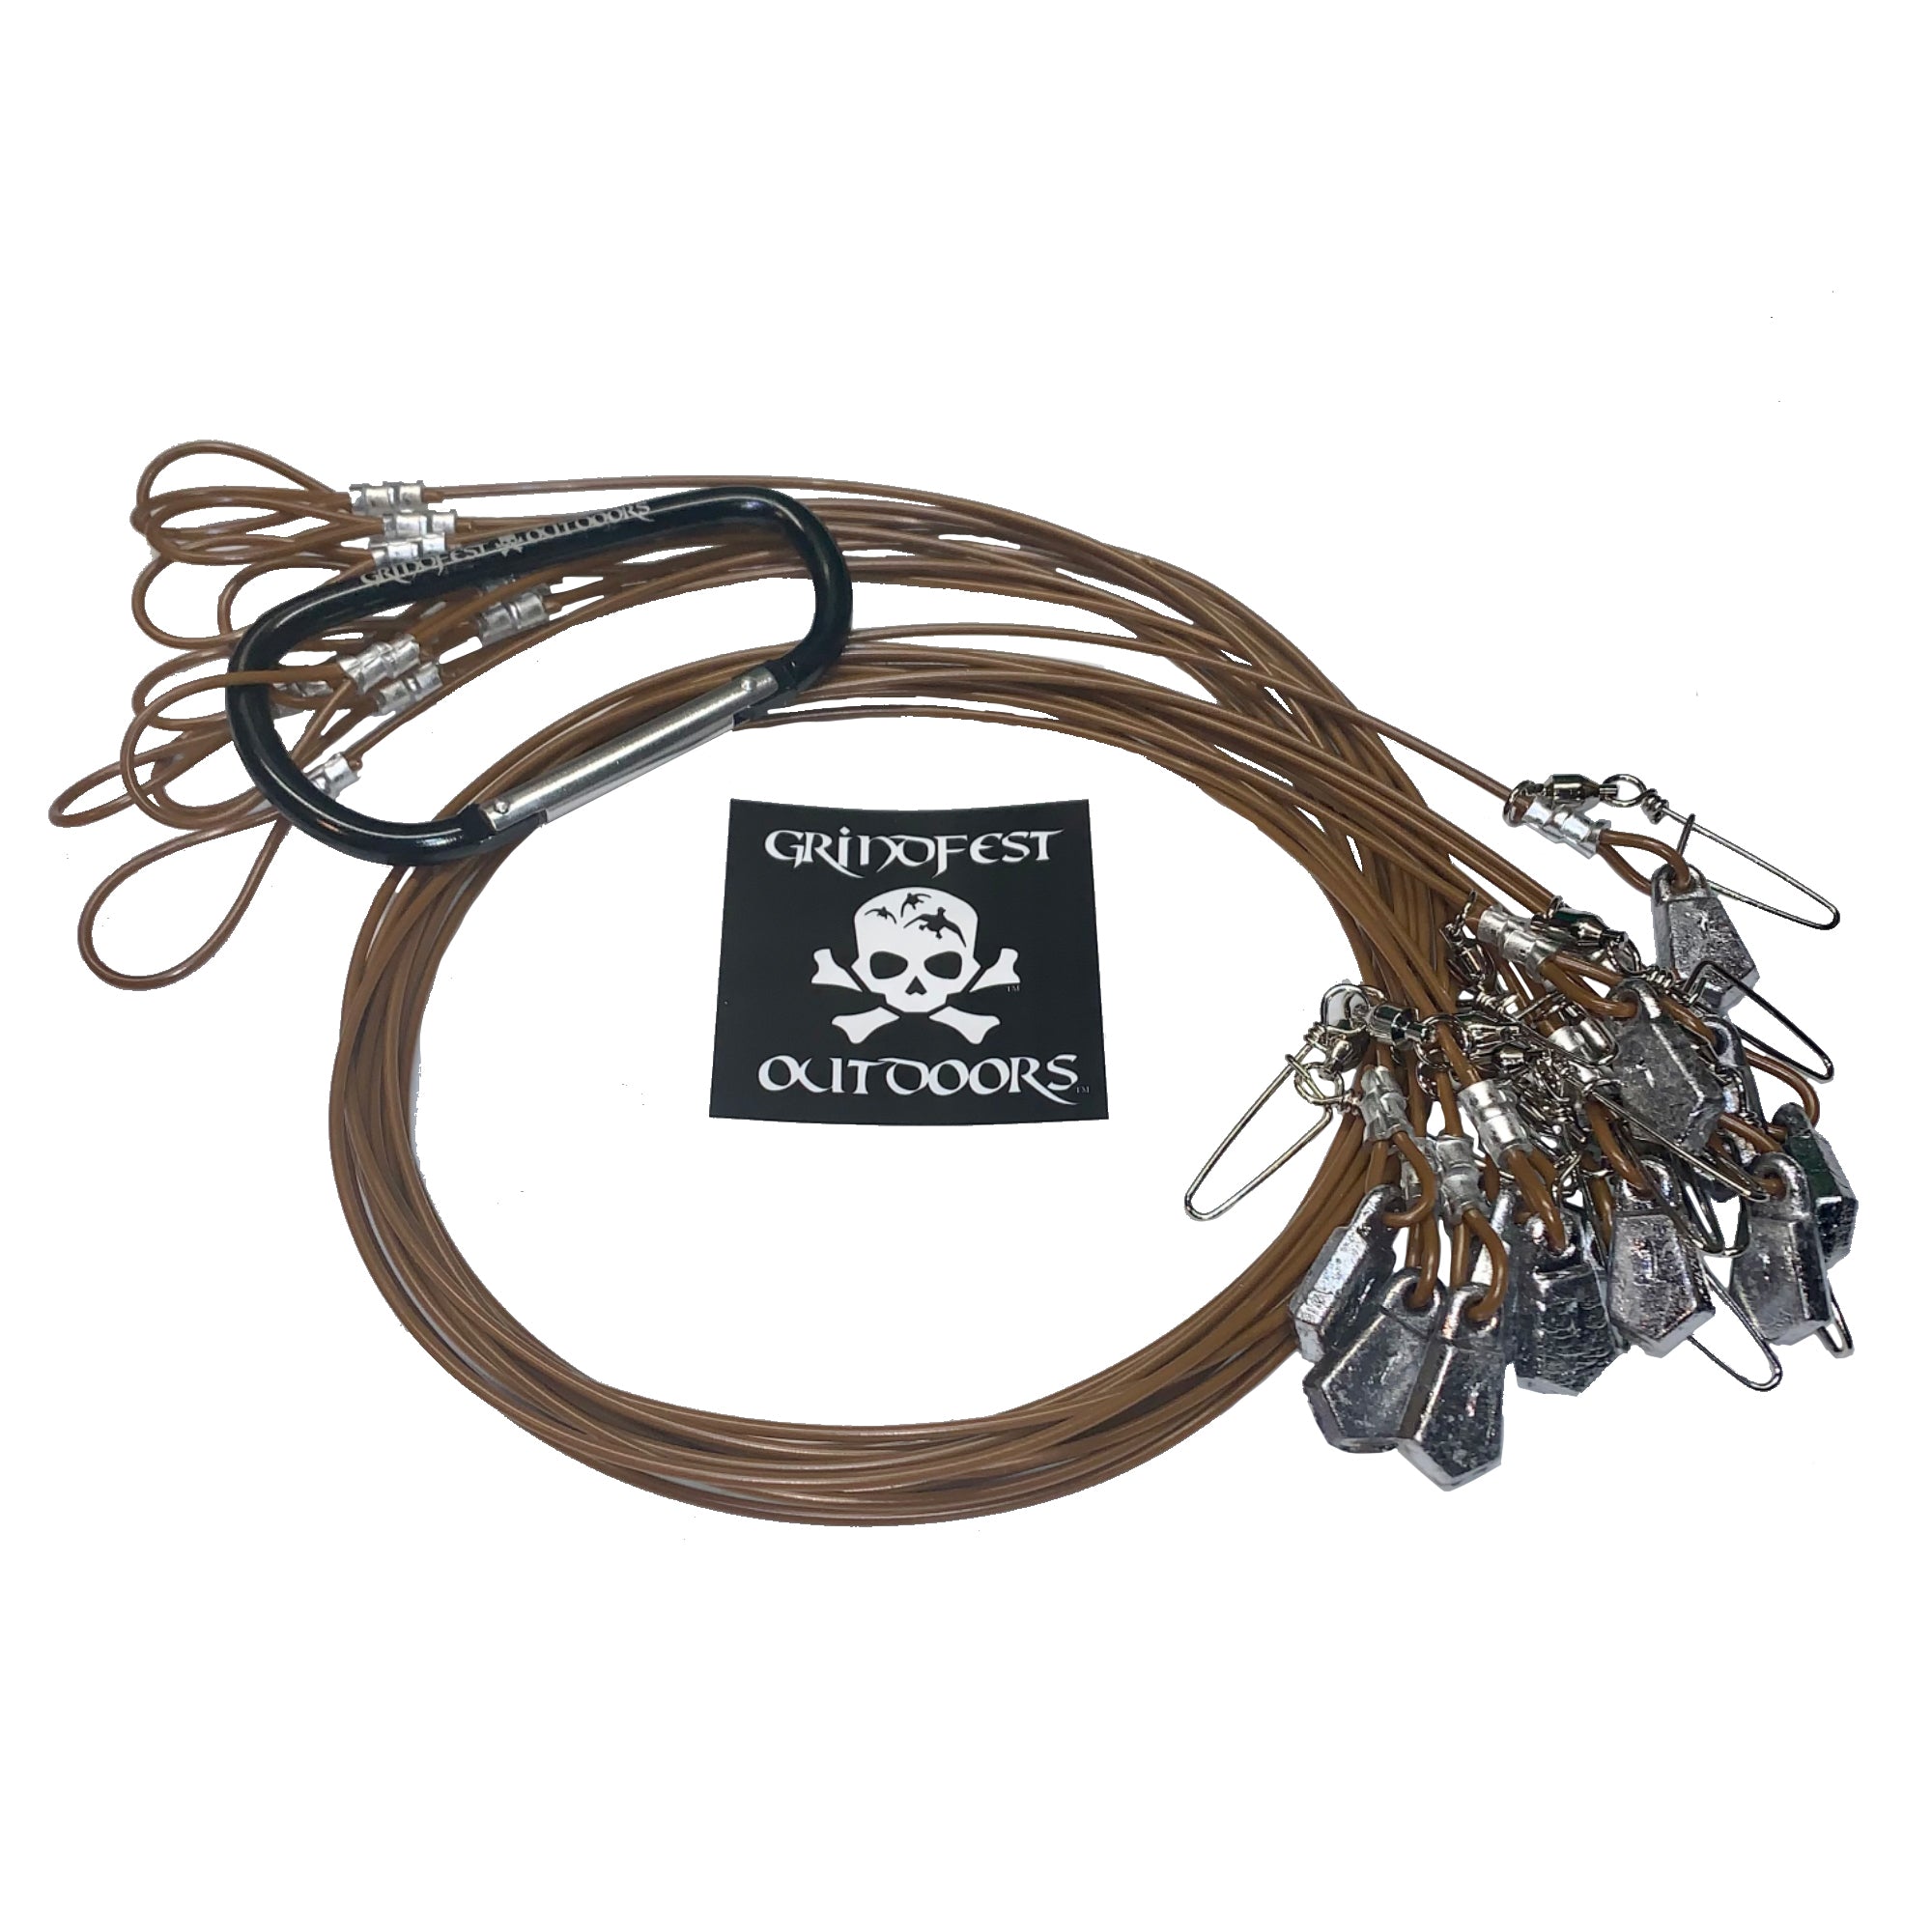 12oz Coated Steel Cable Texas Rigs (Half Dozen) – GrindFest Outdoors